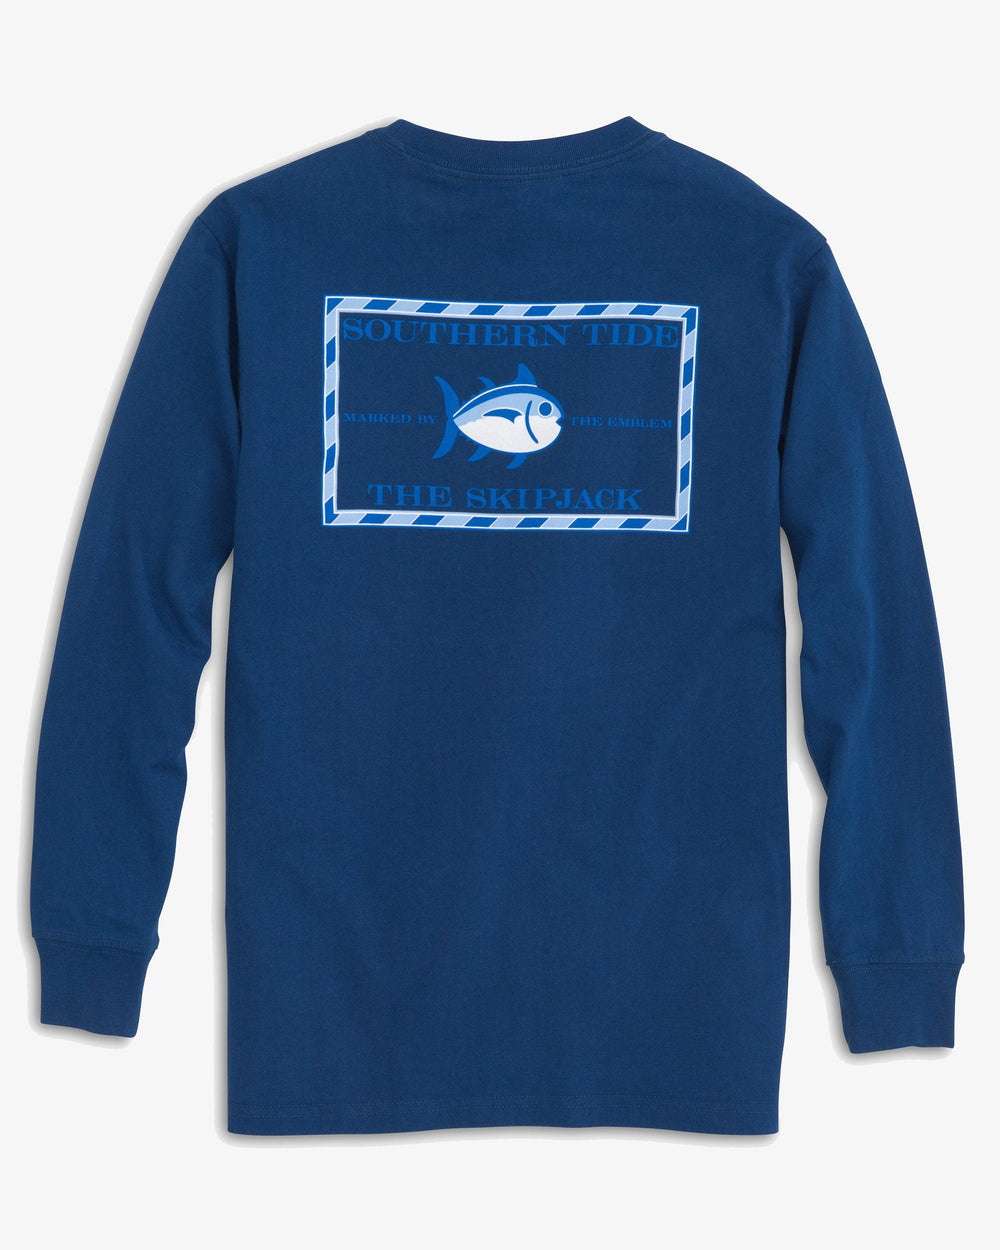 The back view of the Southern Tide Kids Long Sleeve Original Skipjack T-Shirt by Southern Tide - Yacht Blue